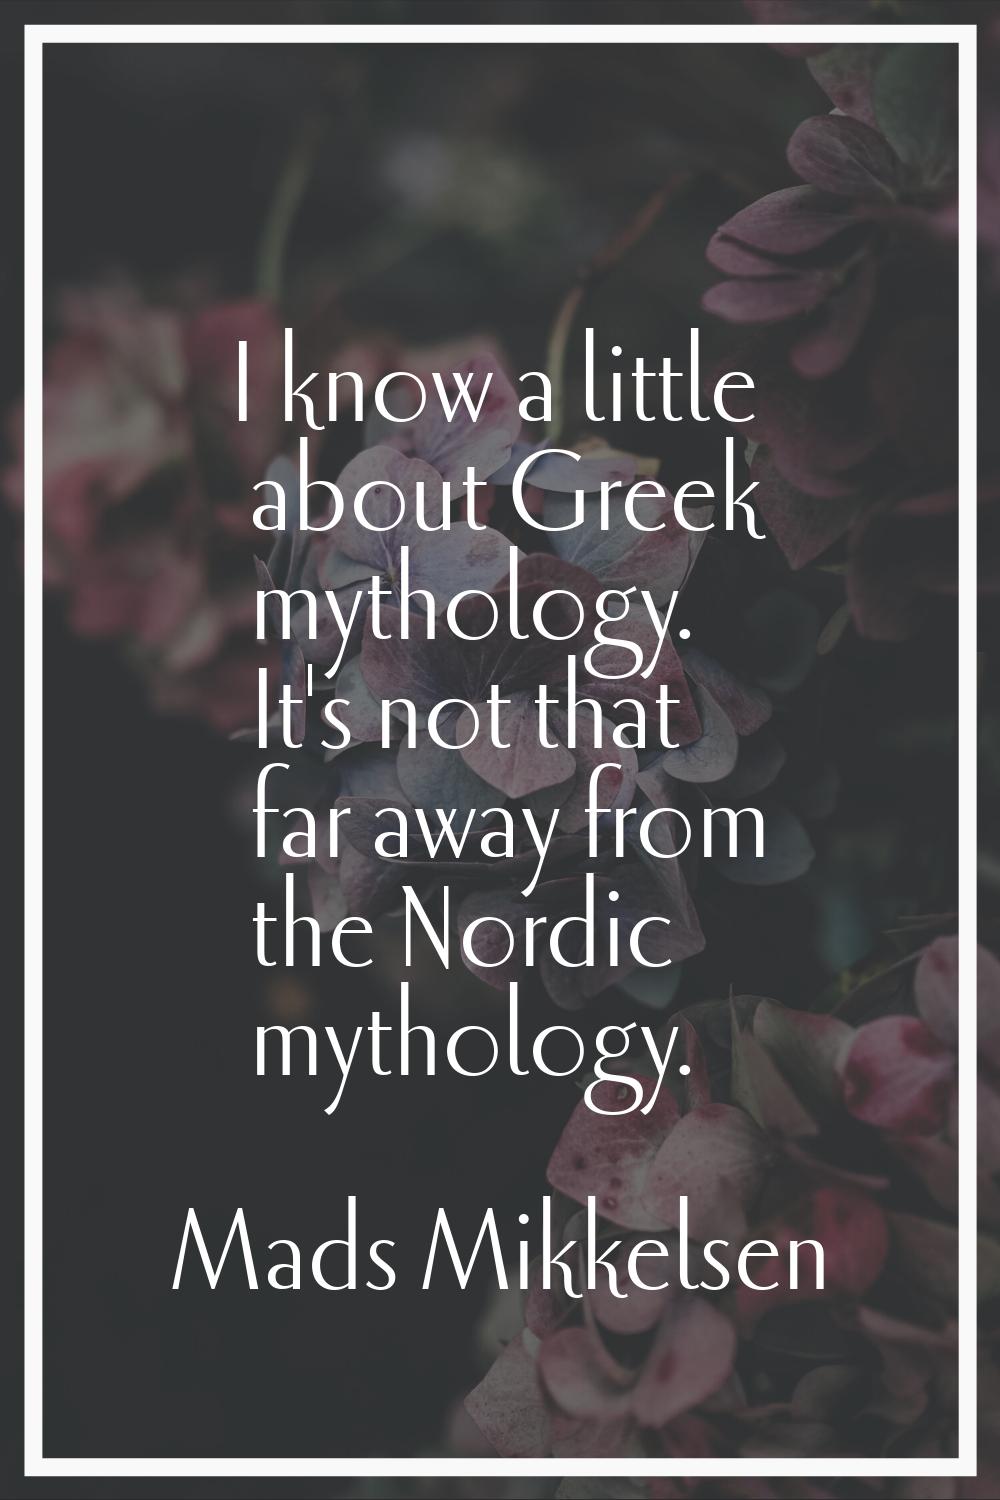 I know a little about Greek mythology. It's not that far away from the Nordic mythology.